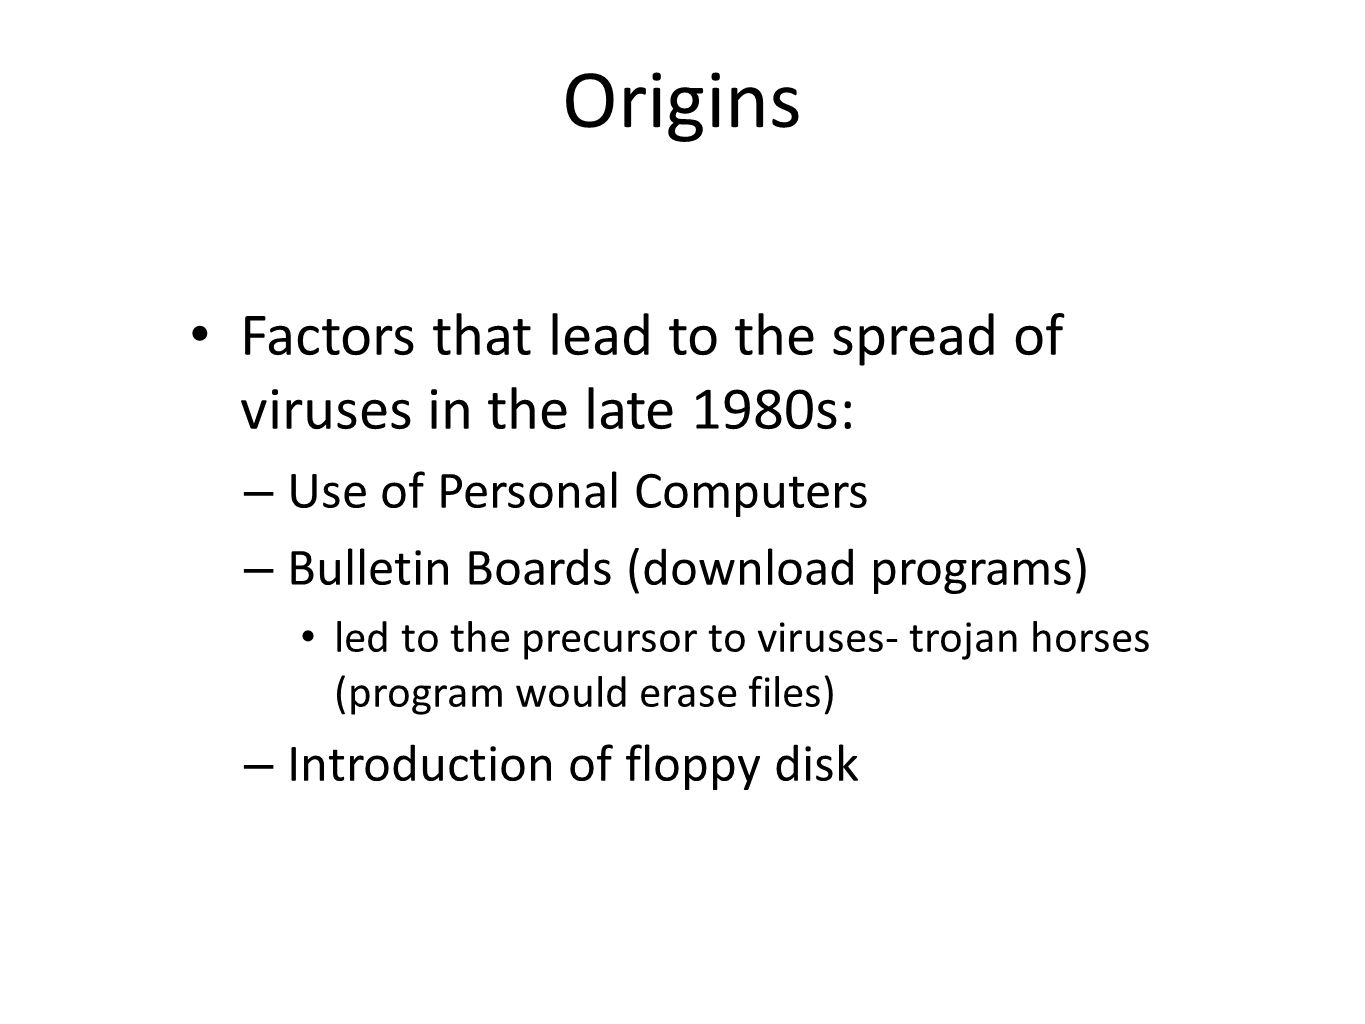 Origins Factors that lead to the spread of viruses in the late 1980s: – Use of Personal Computers – Bulletin Boards (download programs) led to the precursor to viruses- trojan horses (program would erase files) – Introduction of floppy disk